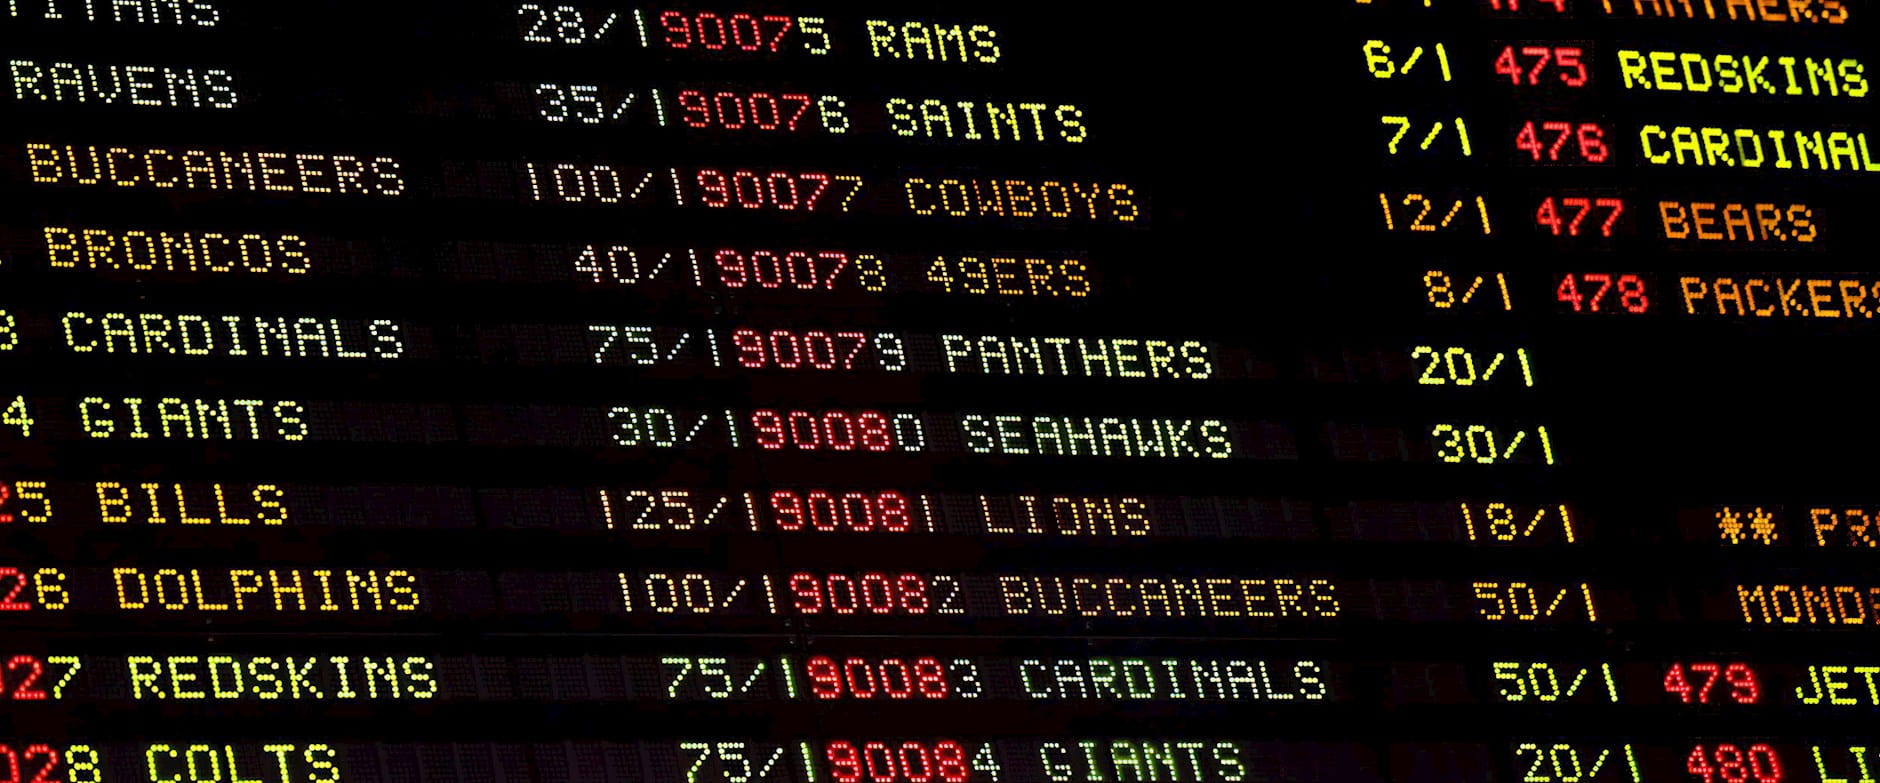 Sportsbook screen with teams listed